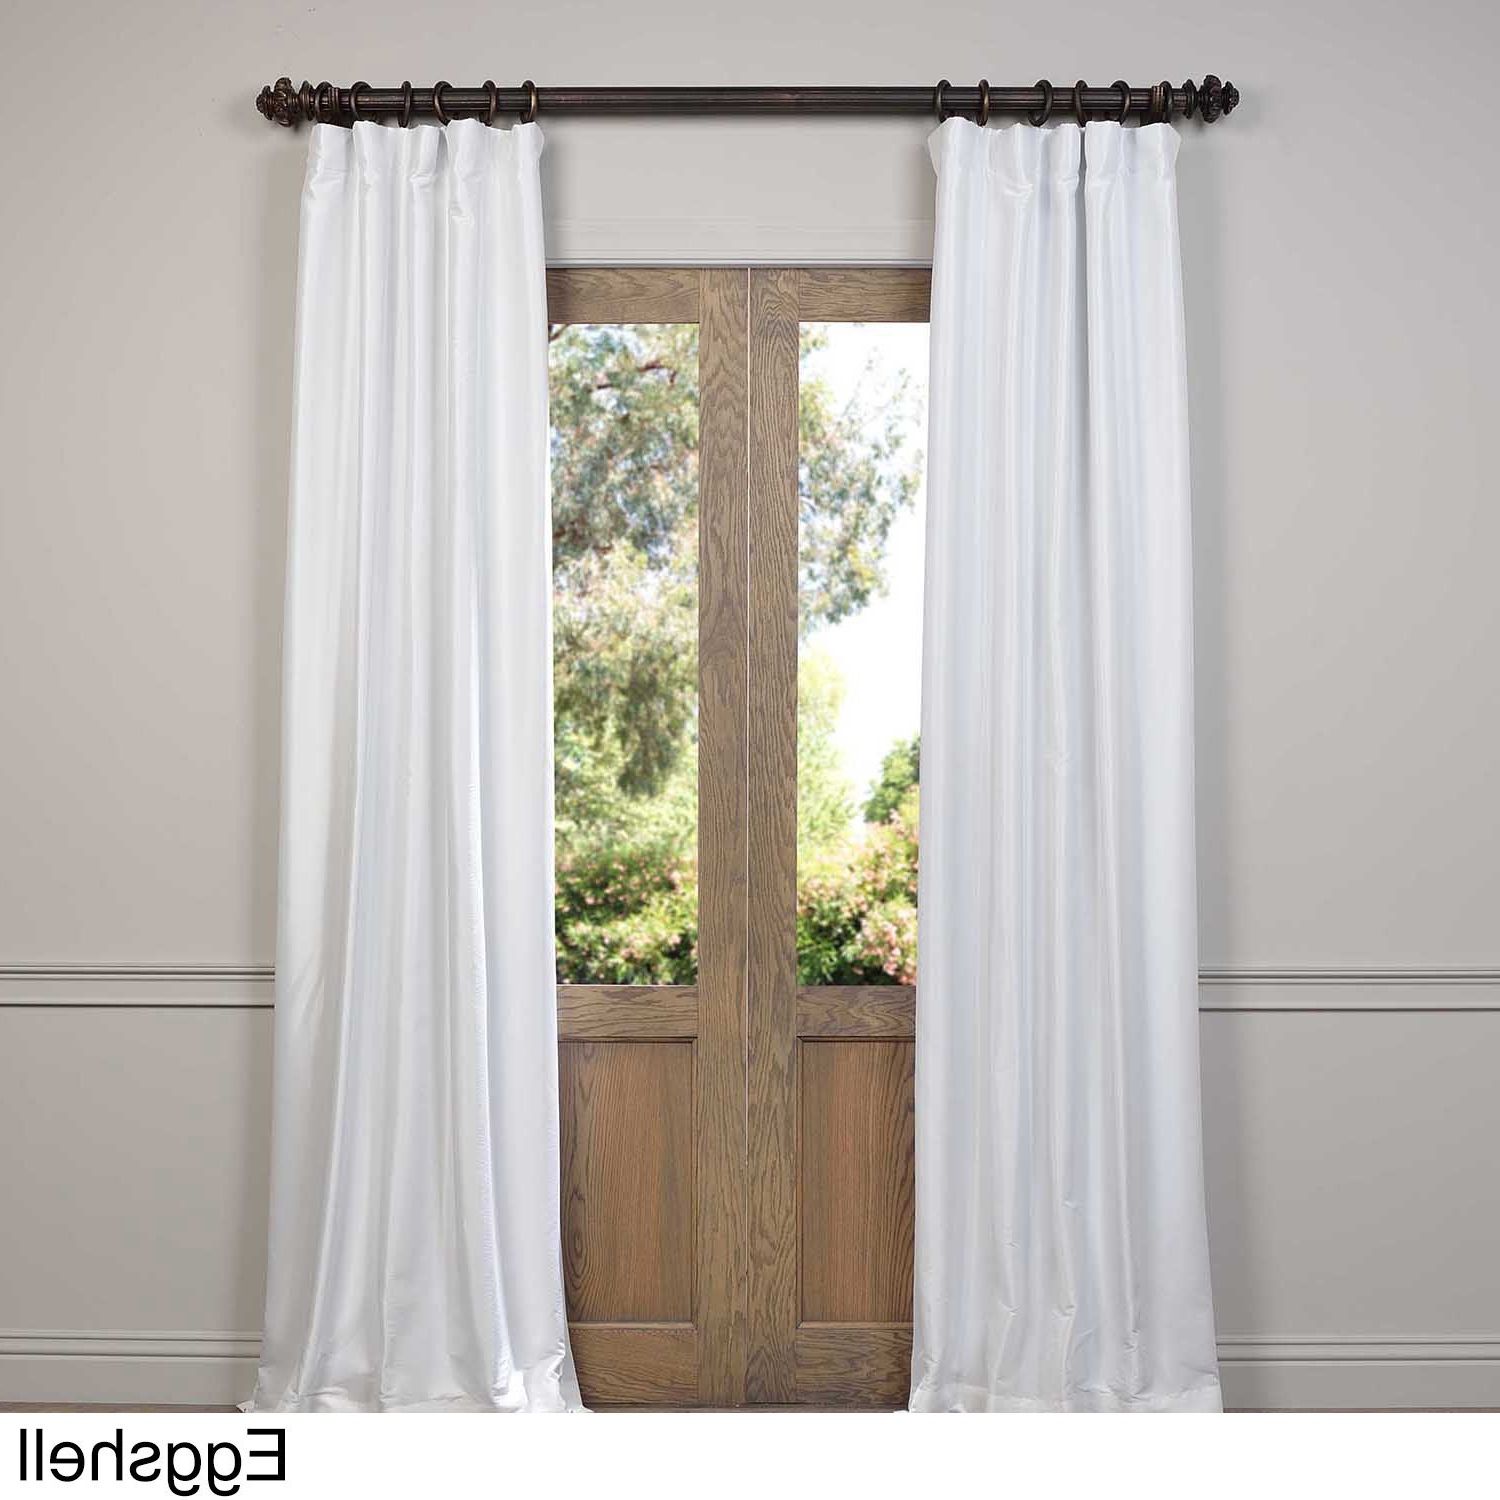 Faux Silk Taffeta Solid Blackout Single Curtain Panels With Regard To 2021 Exclusive Fabrics Faux Silk Taffeta Solid Blackout Single (View 14 of 20)